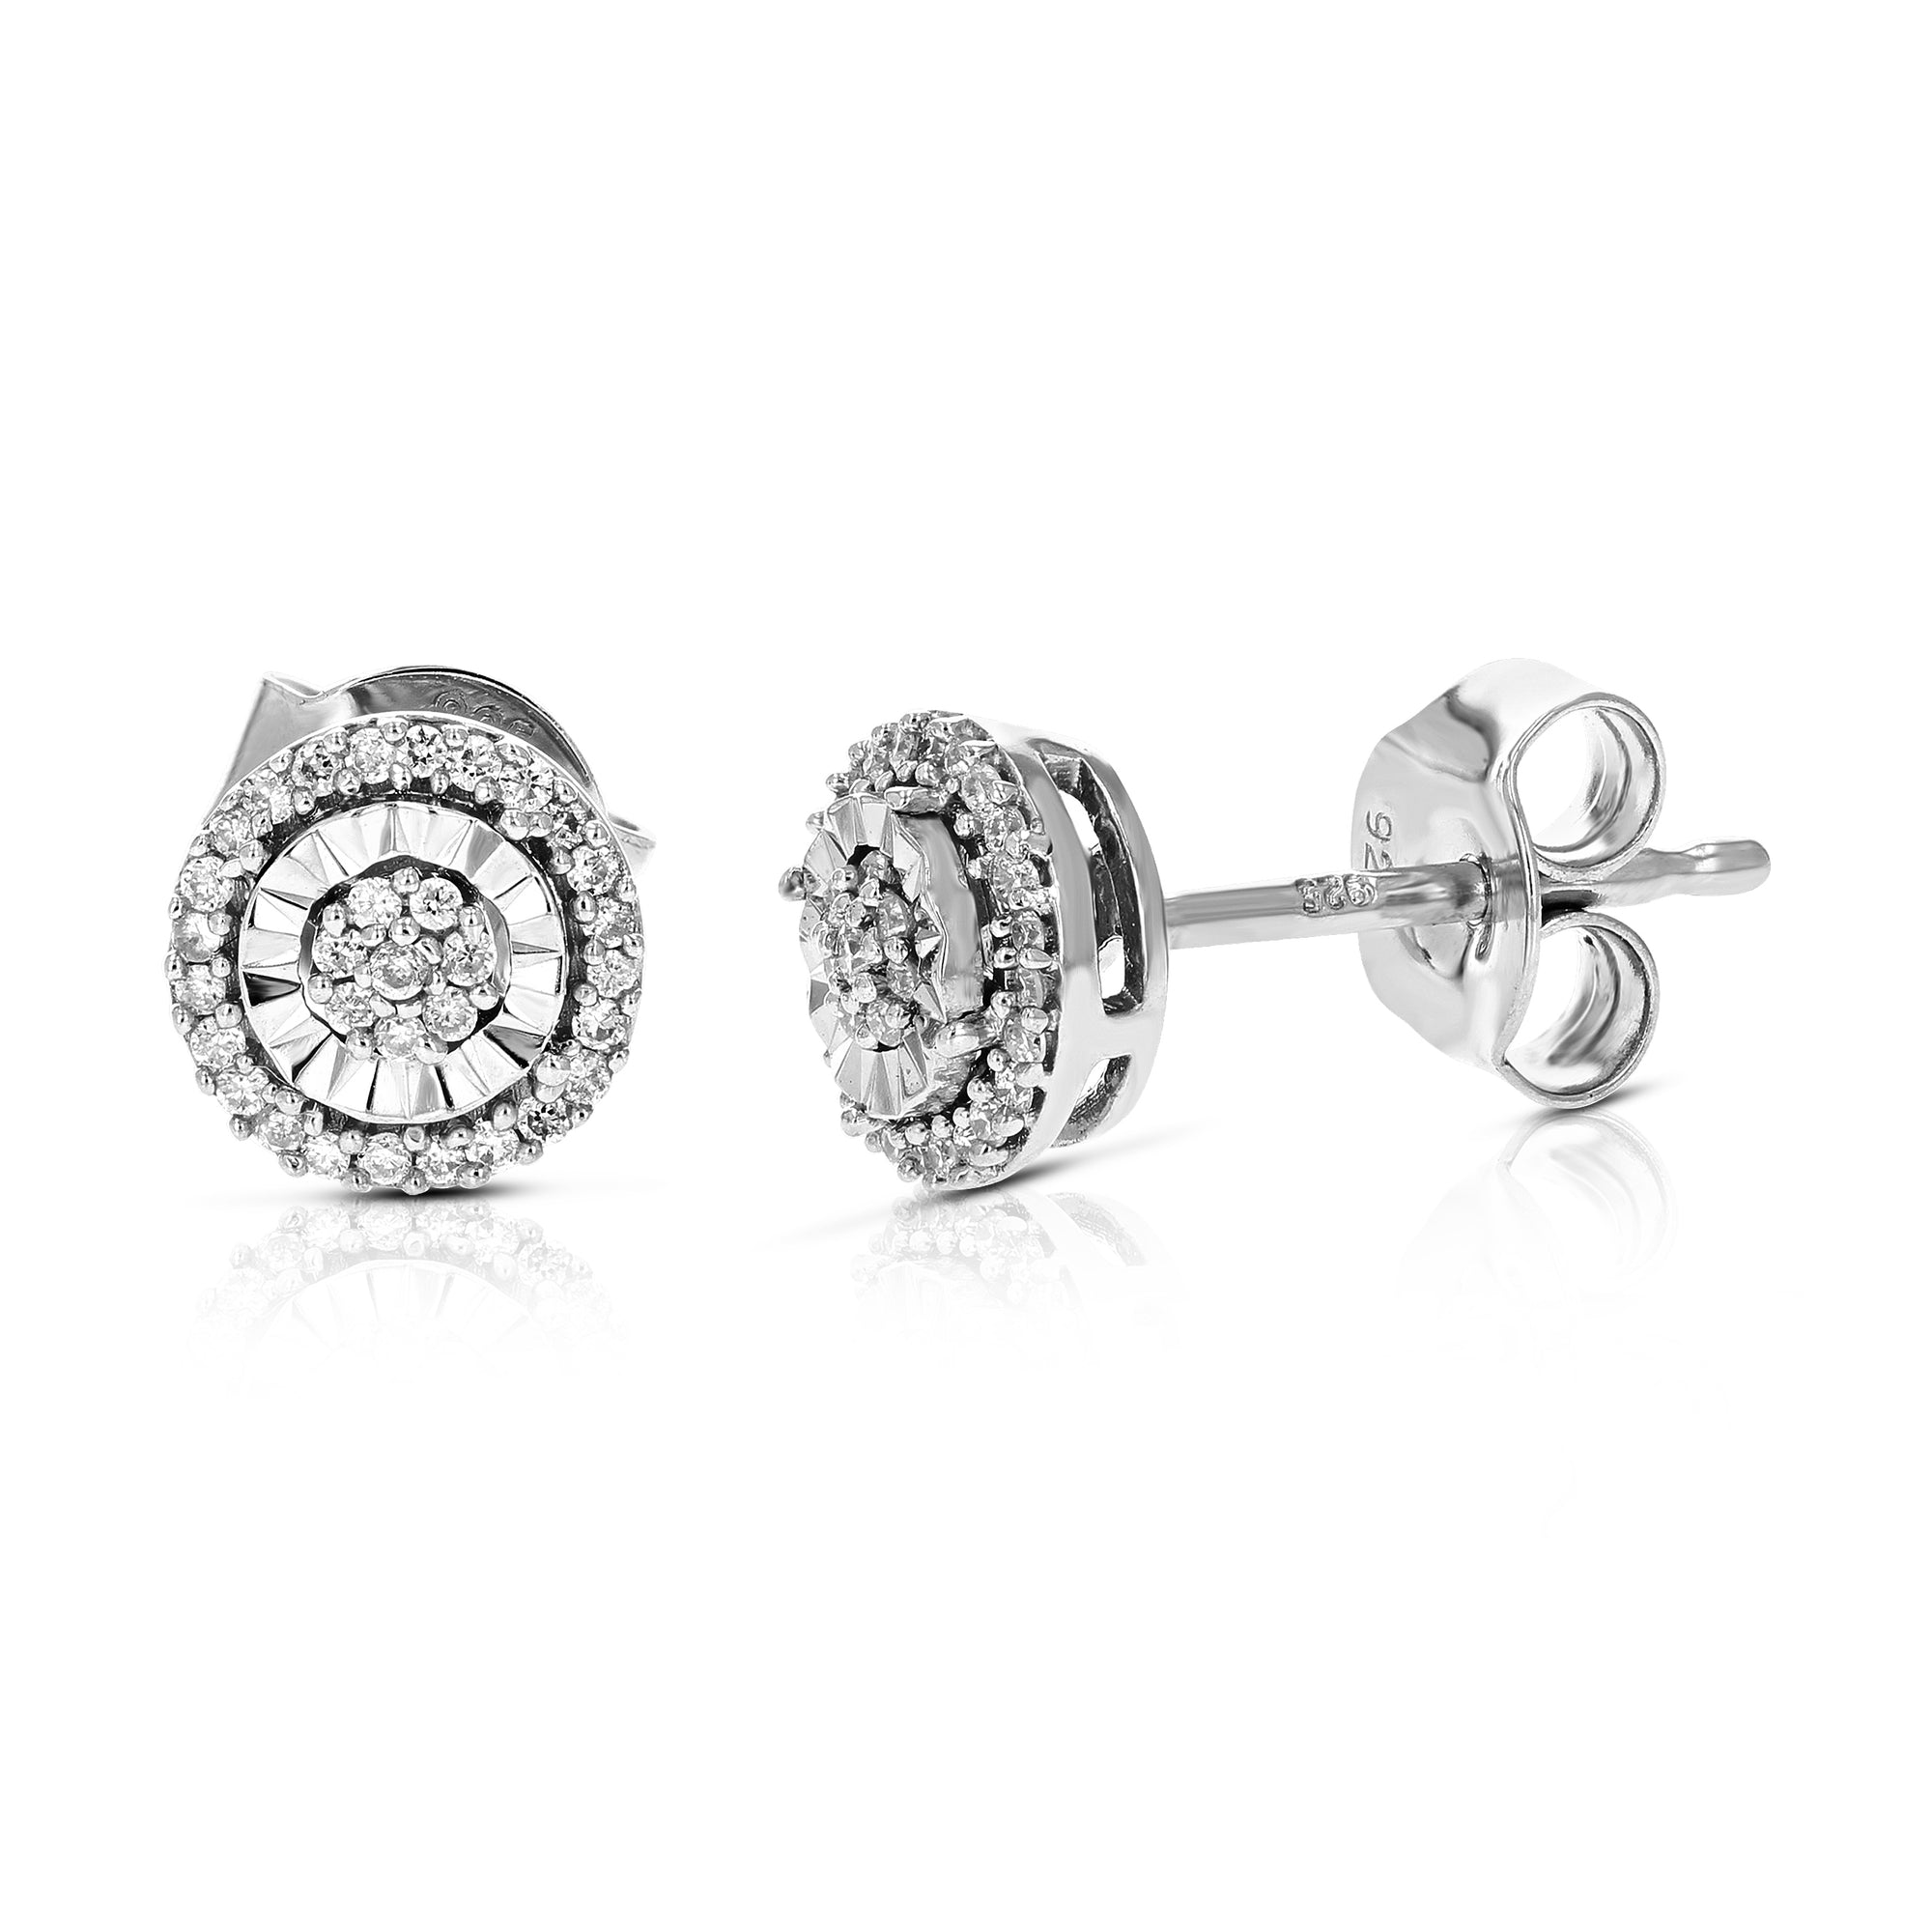 1/8 cttw 64 Stones Round Lab Grown Diamond Studs Earrings .925 Sterling Silver Prong Set, 1/2 Inch